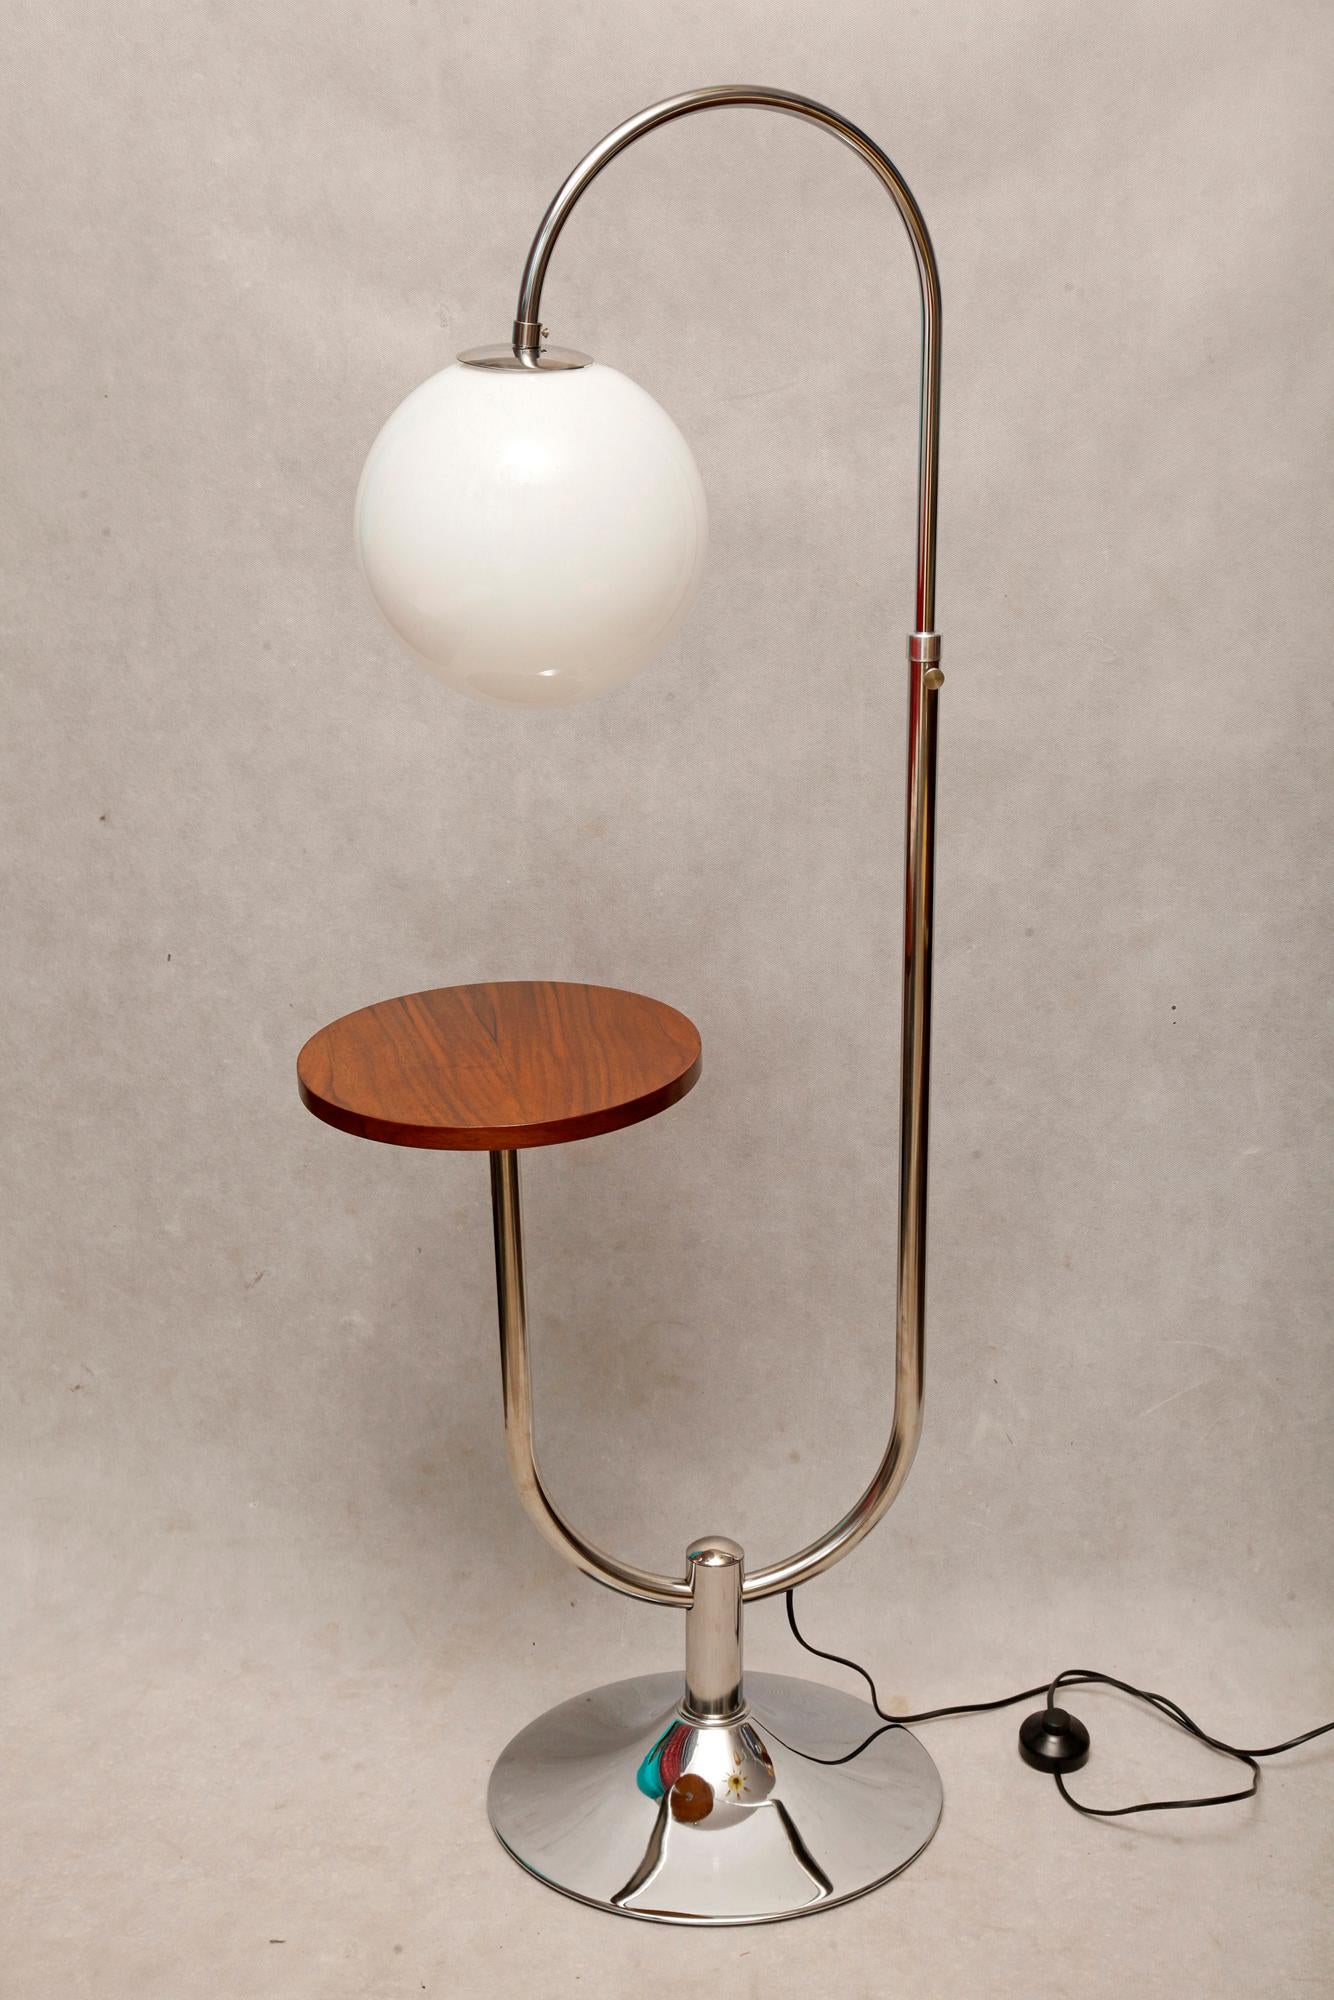 Bauhaus floor lamp was designed by Robert Slezak in the 1930s for the company Slezaky Zavody, known for producing tubular furniture. It features a chrome-plated base, a walnut shelf, and the original glass shade. In 1908, Robert Slezak opened a